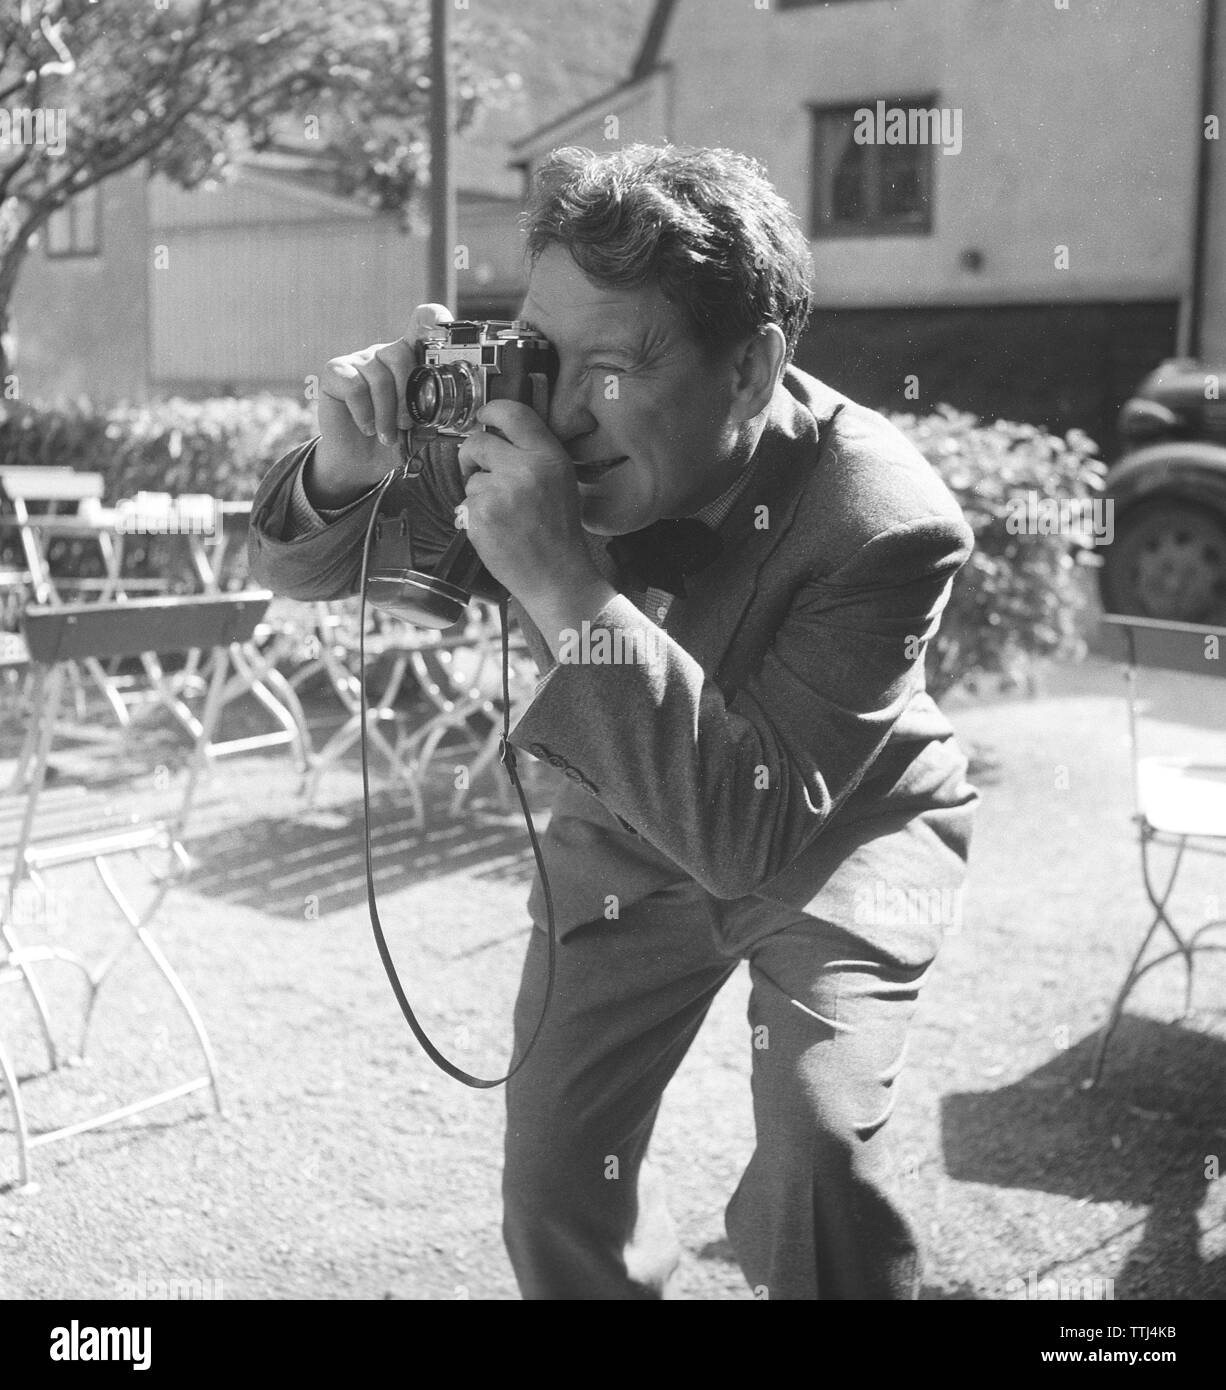 Amateur photographer in the 1950s. A young man is aiming to take a picture of something or someone with his camera. He is american actor Burgess Meredith taking a picture. Sweden 1954. Photo Kristoffersson Ref BF78-1 Stock Photo